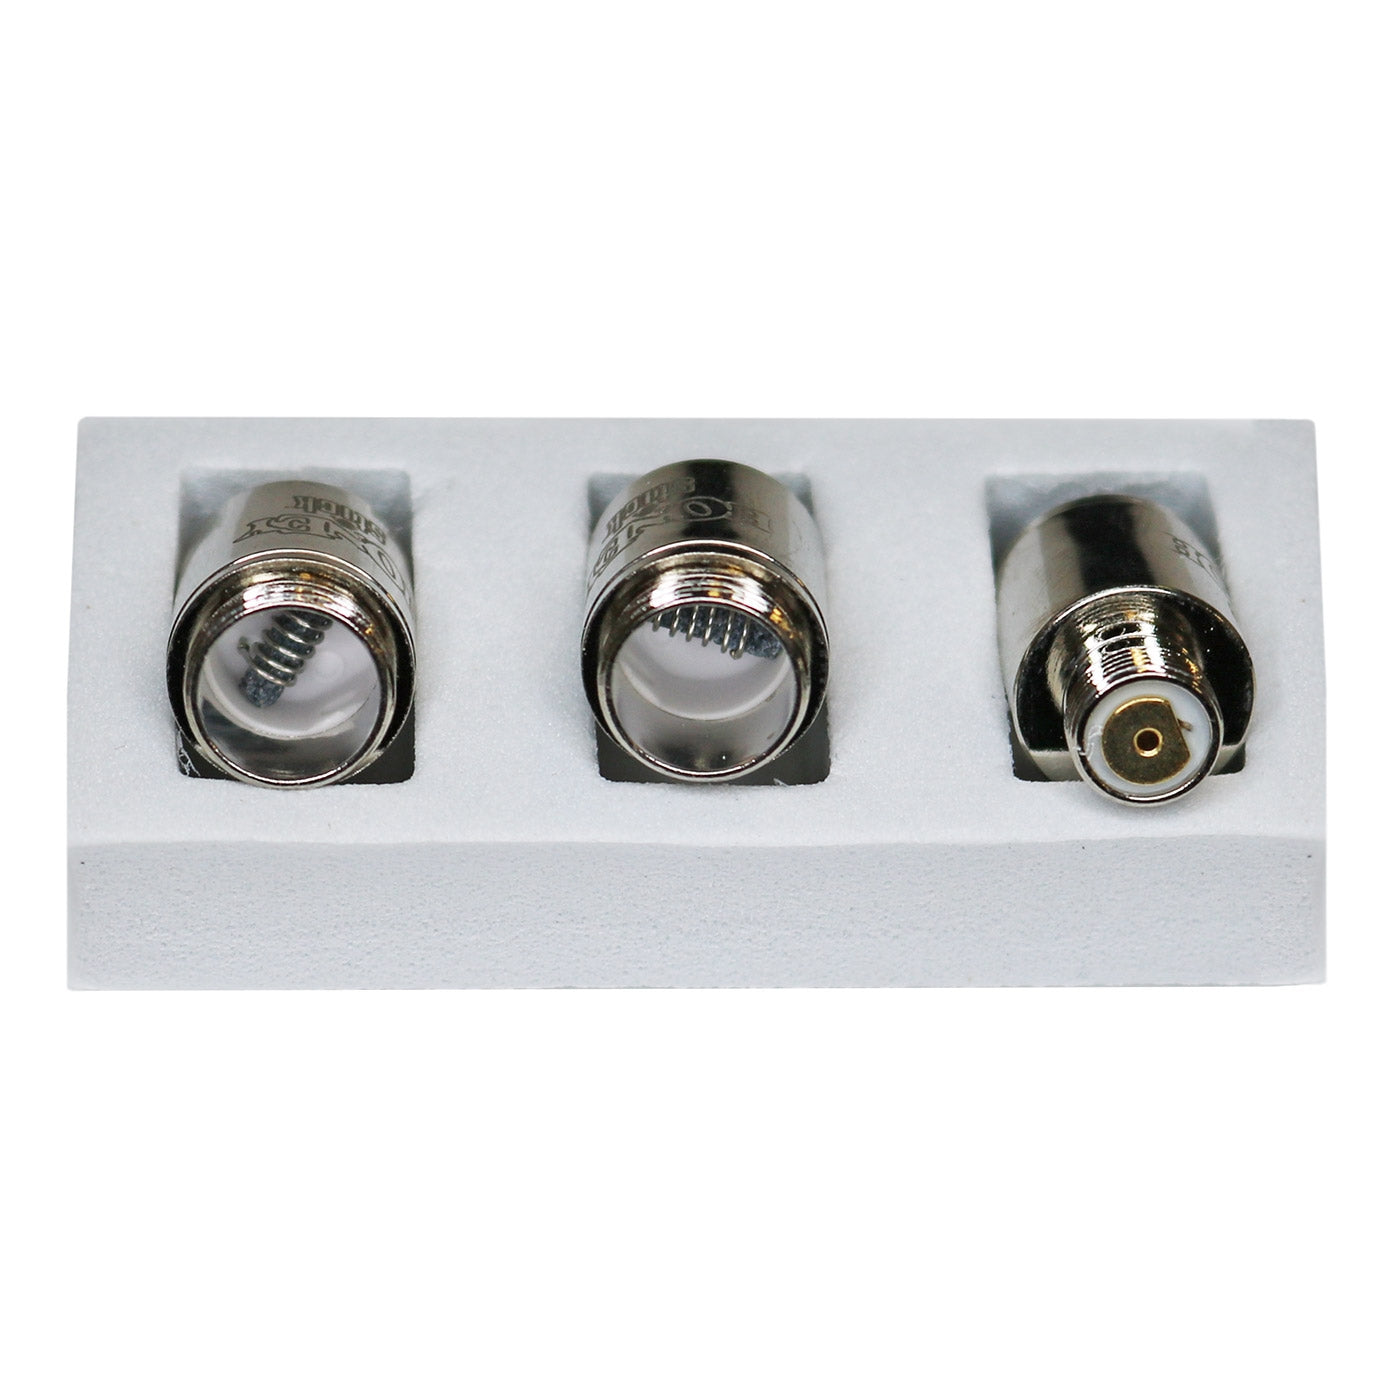 Silencer Cartridge Coils Replacement - 3 pack